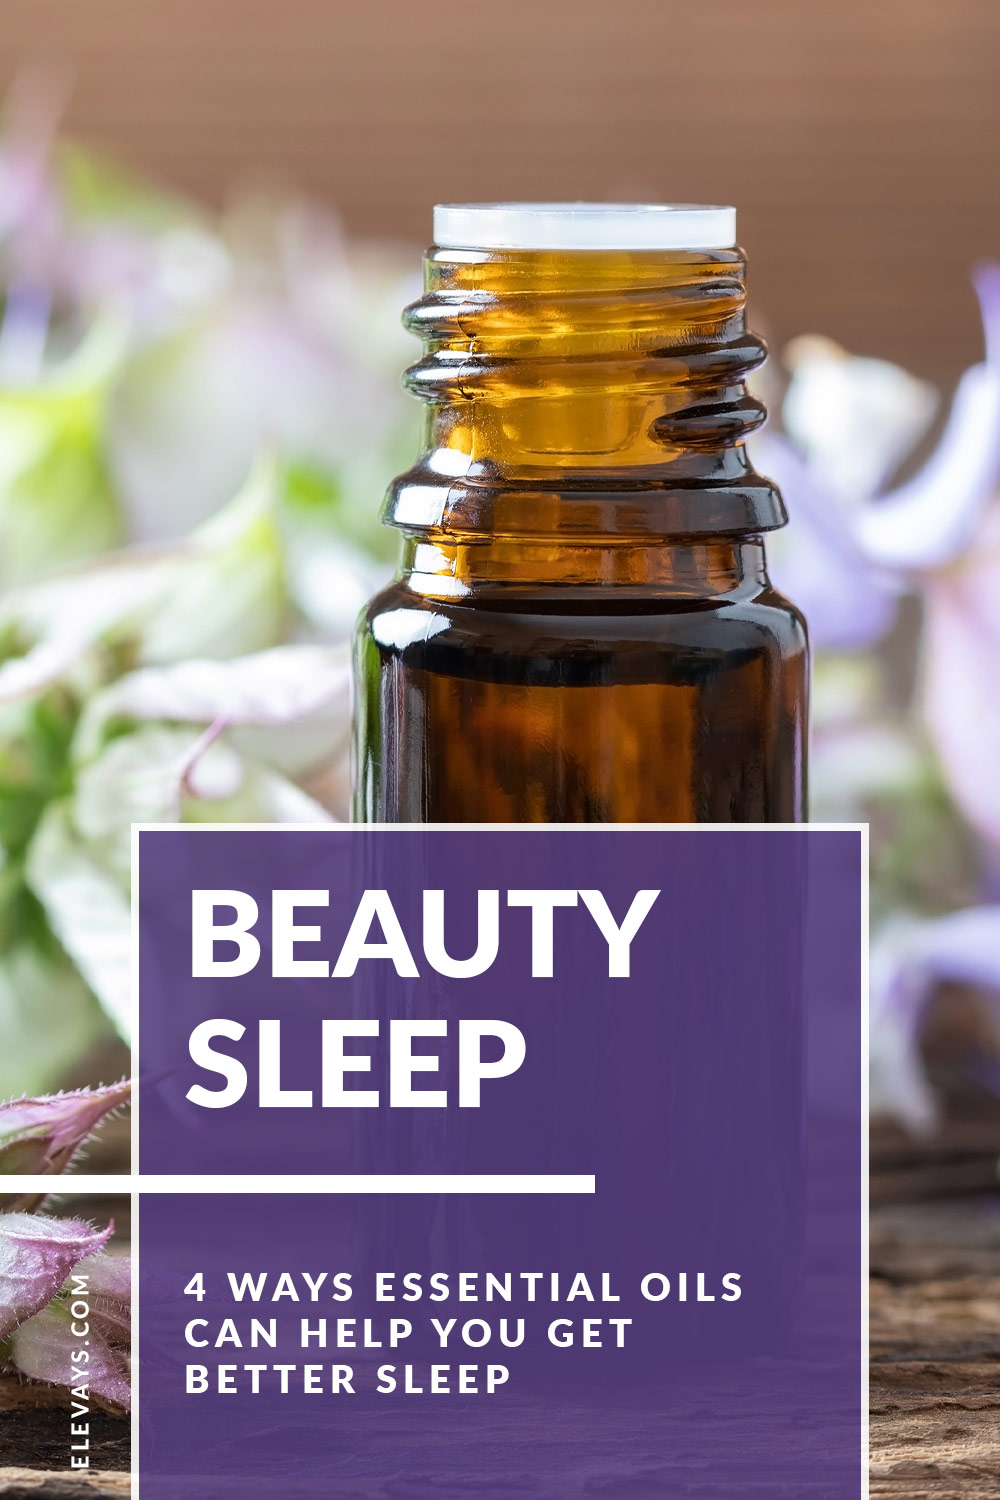 4 Ways to Get Better Sleep for Beauty & Health with Essential Oils